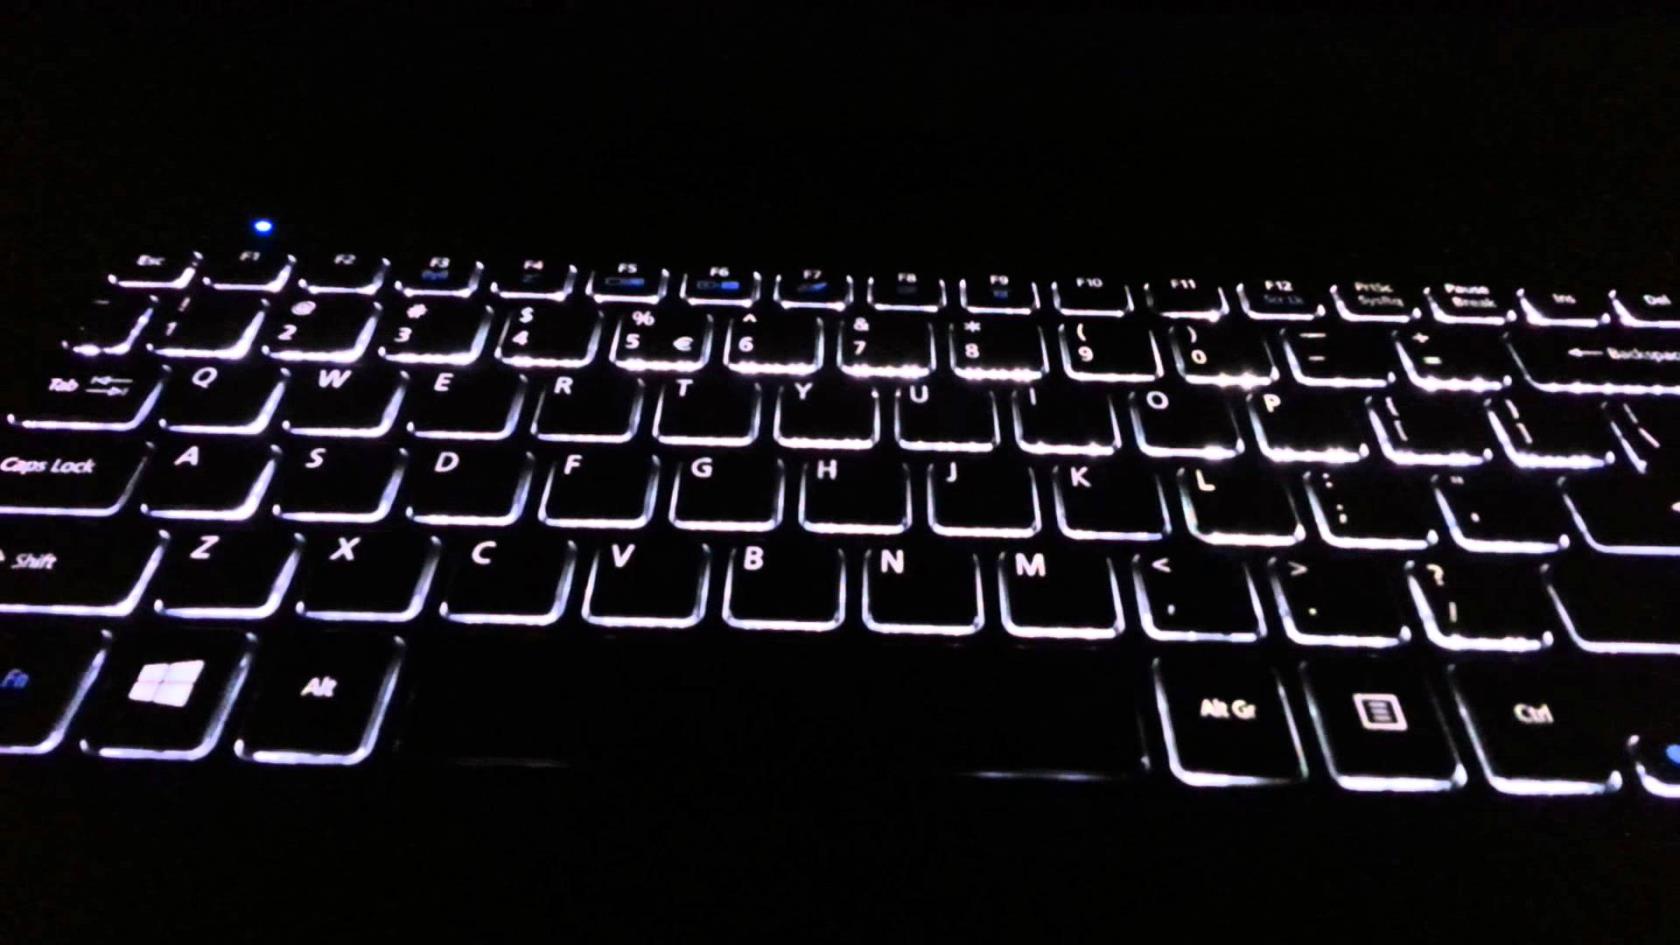 How To Turn On Laptop Keyboard Lights Easily On Many Models